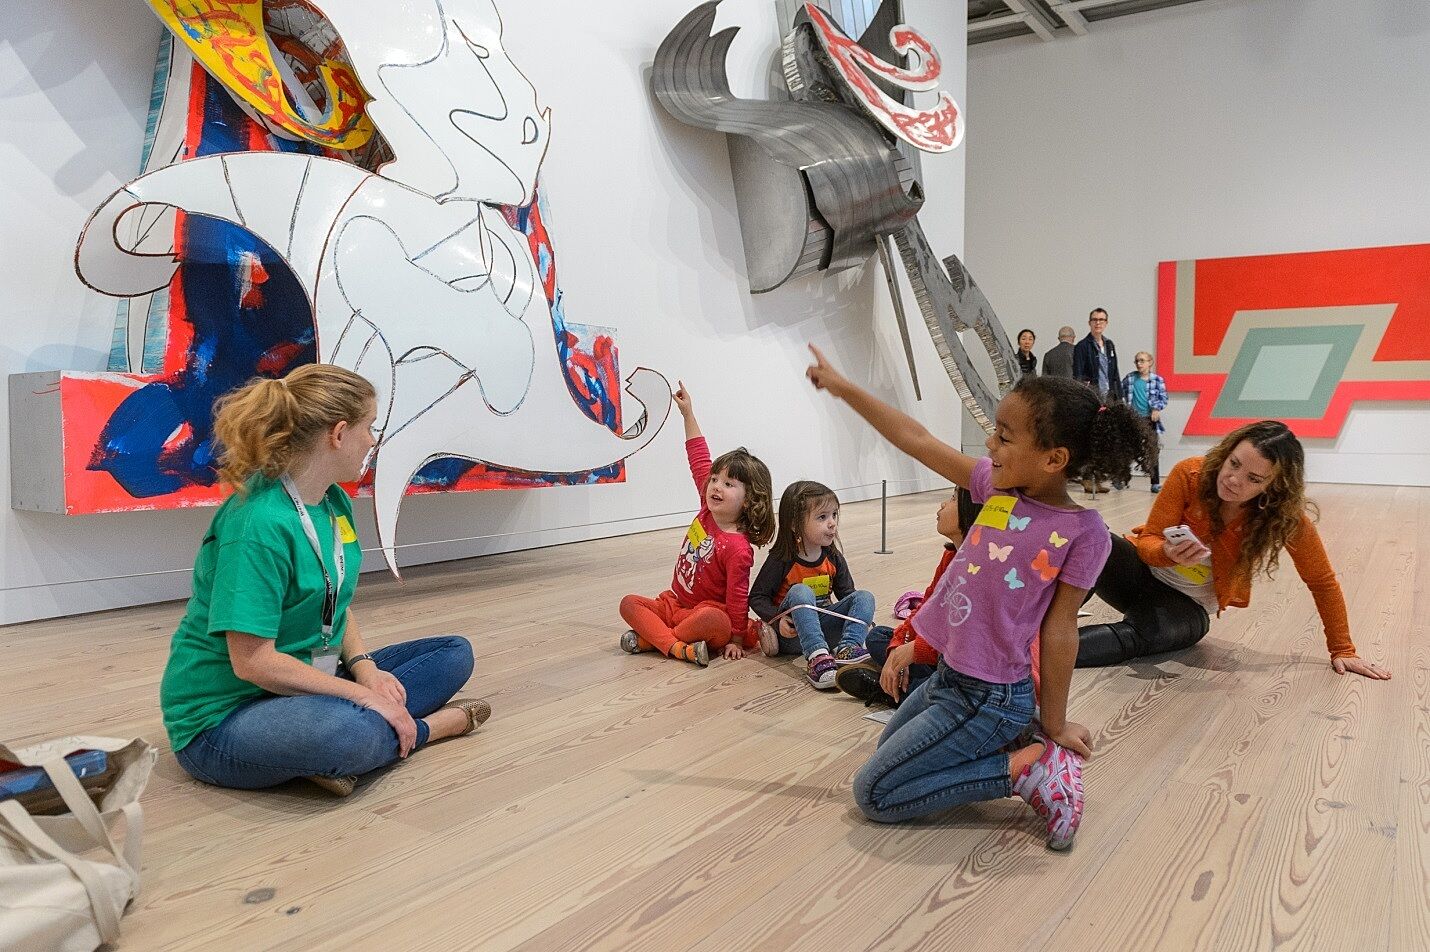 Kids point to a work by Frank Stella in the gallery.